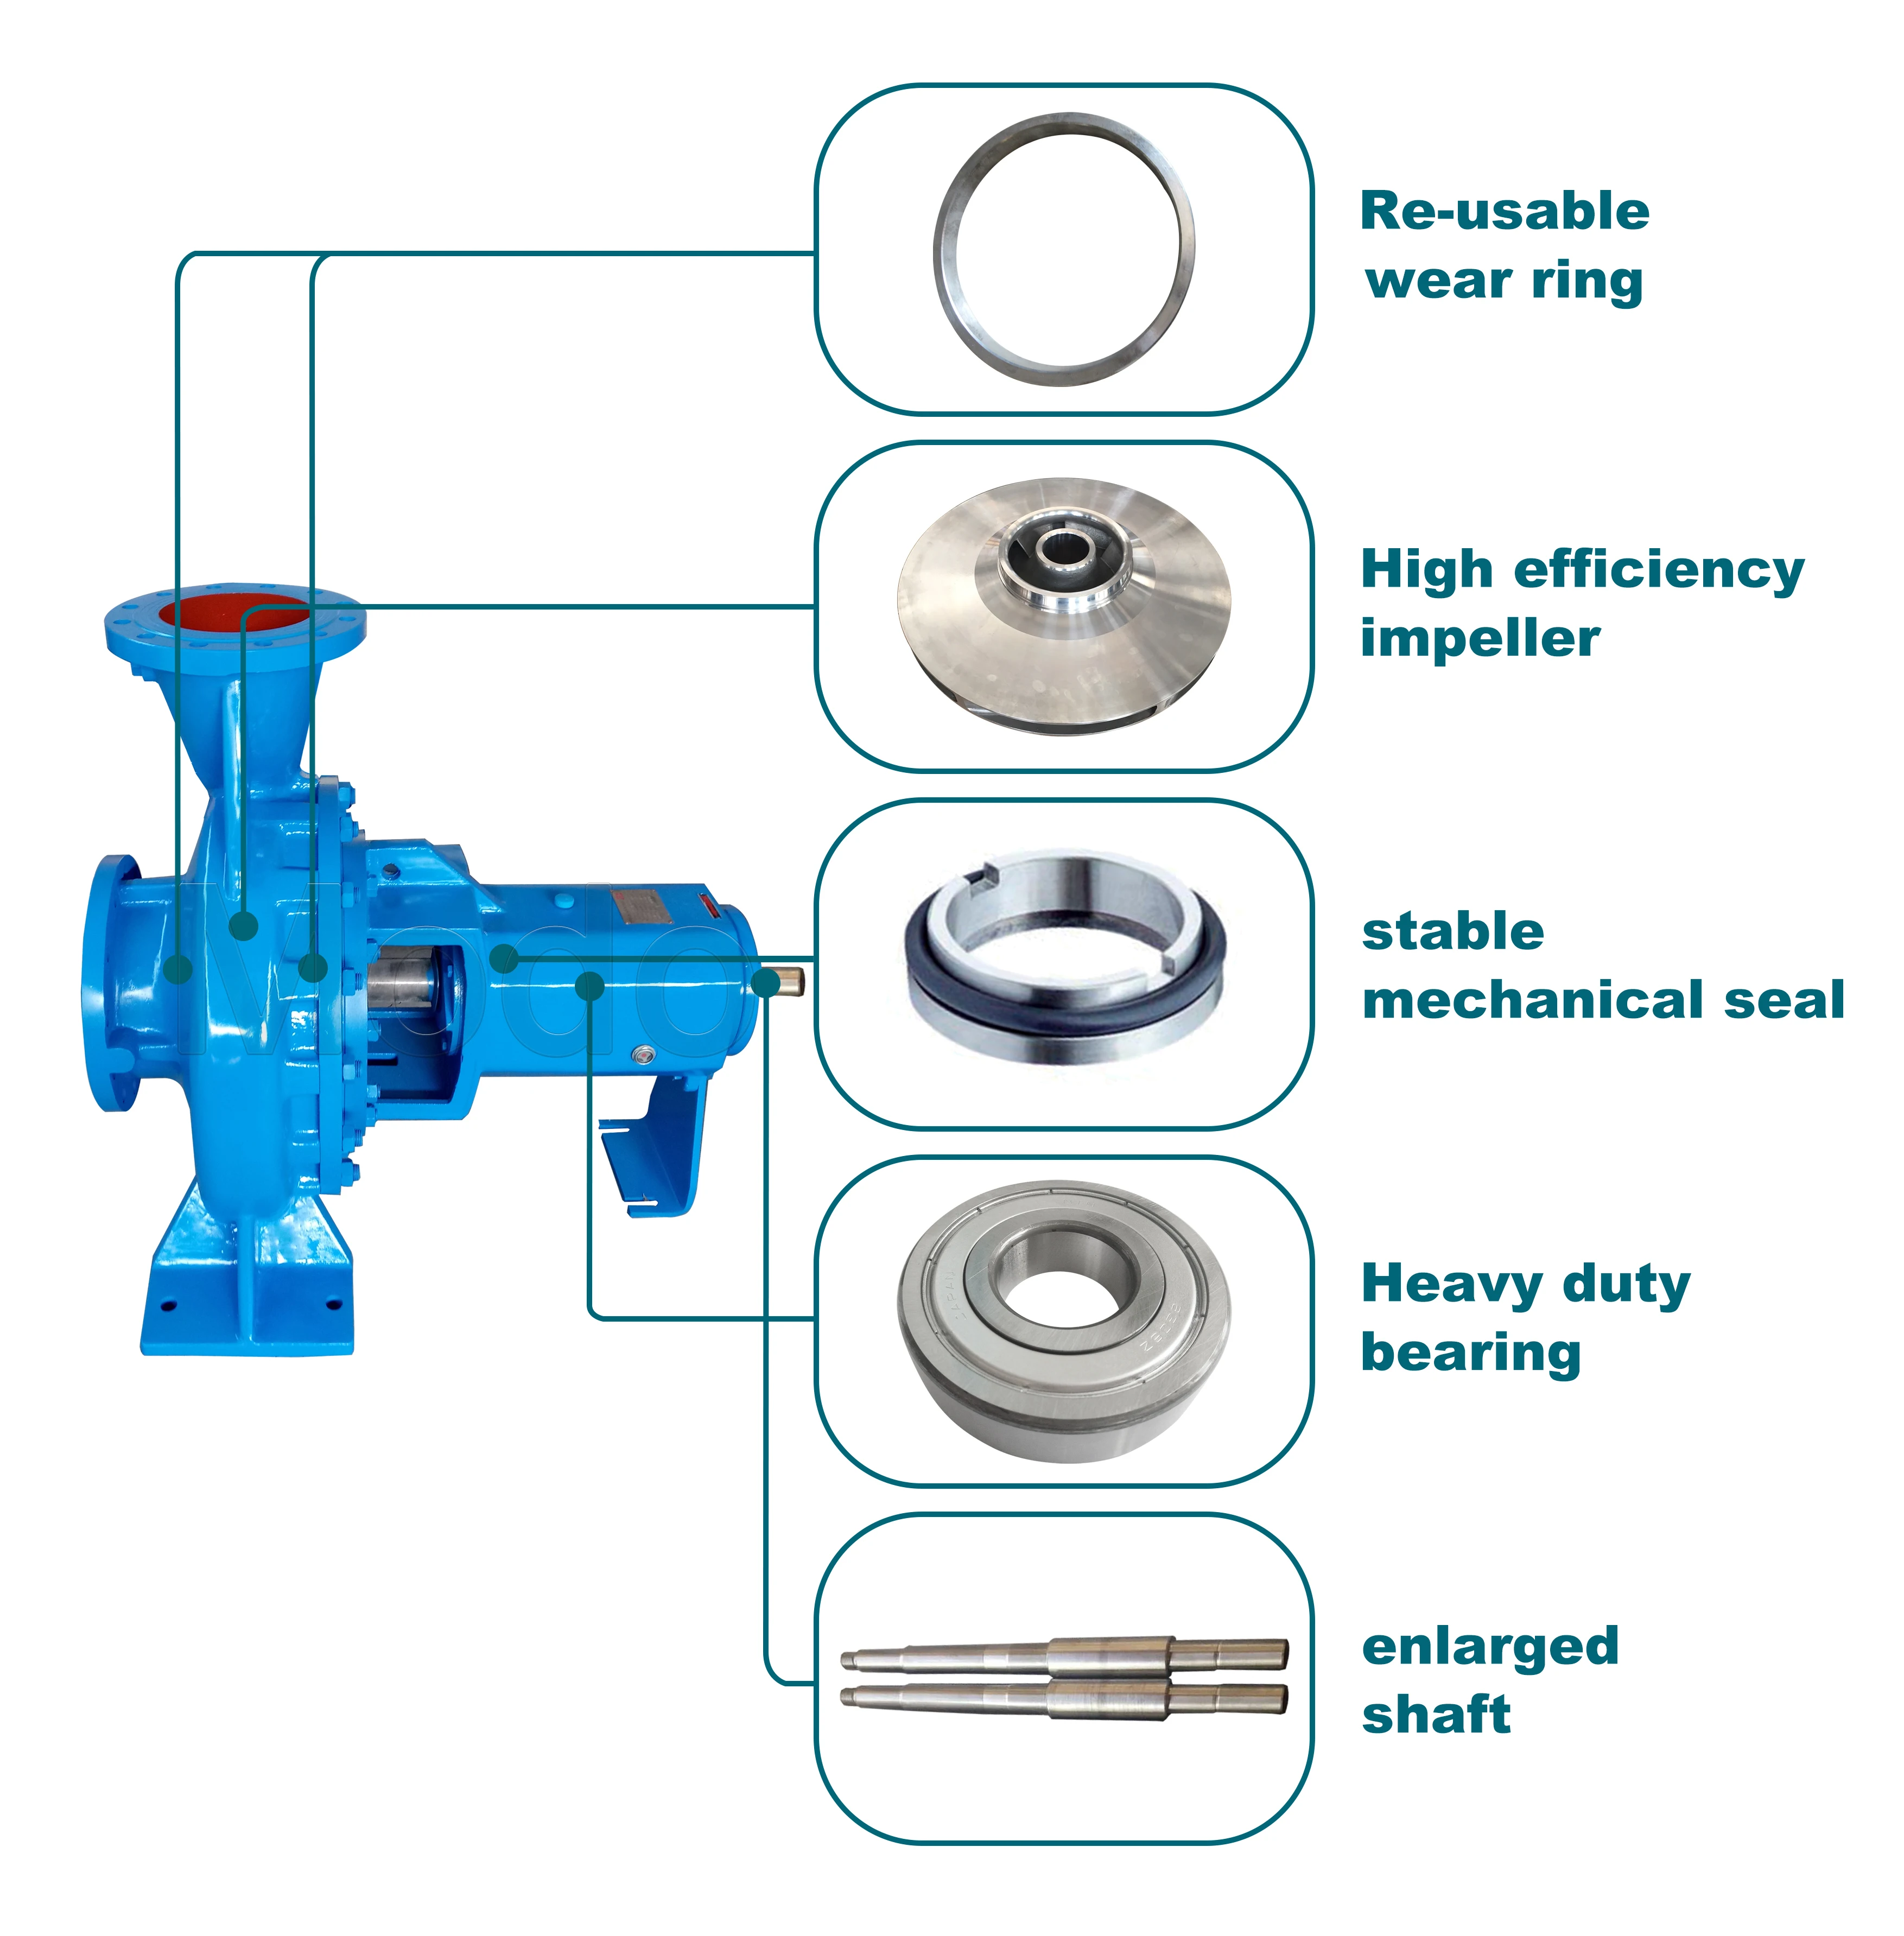 Mechanical Seals in Centrifugal Pumps